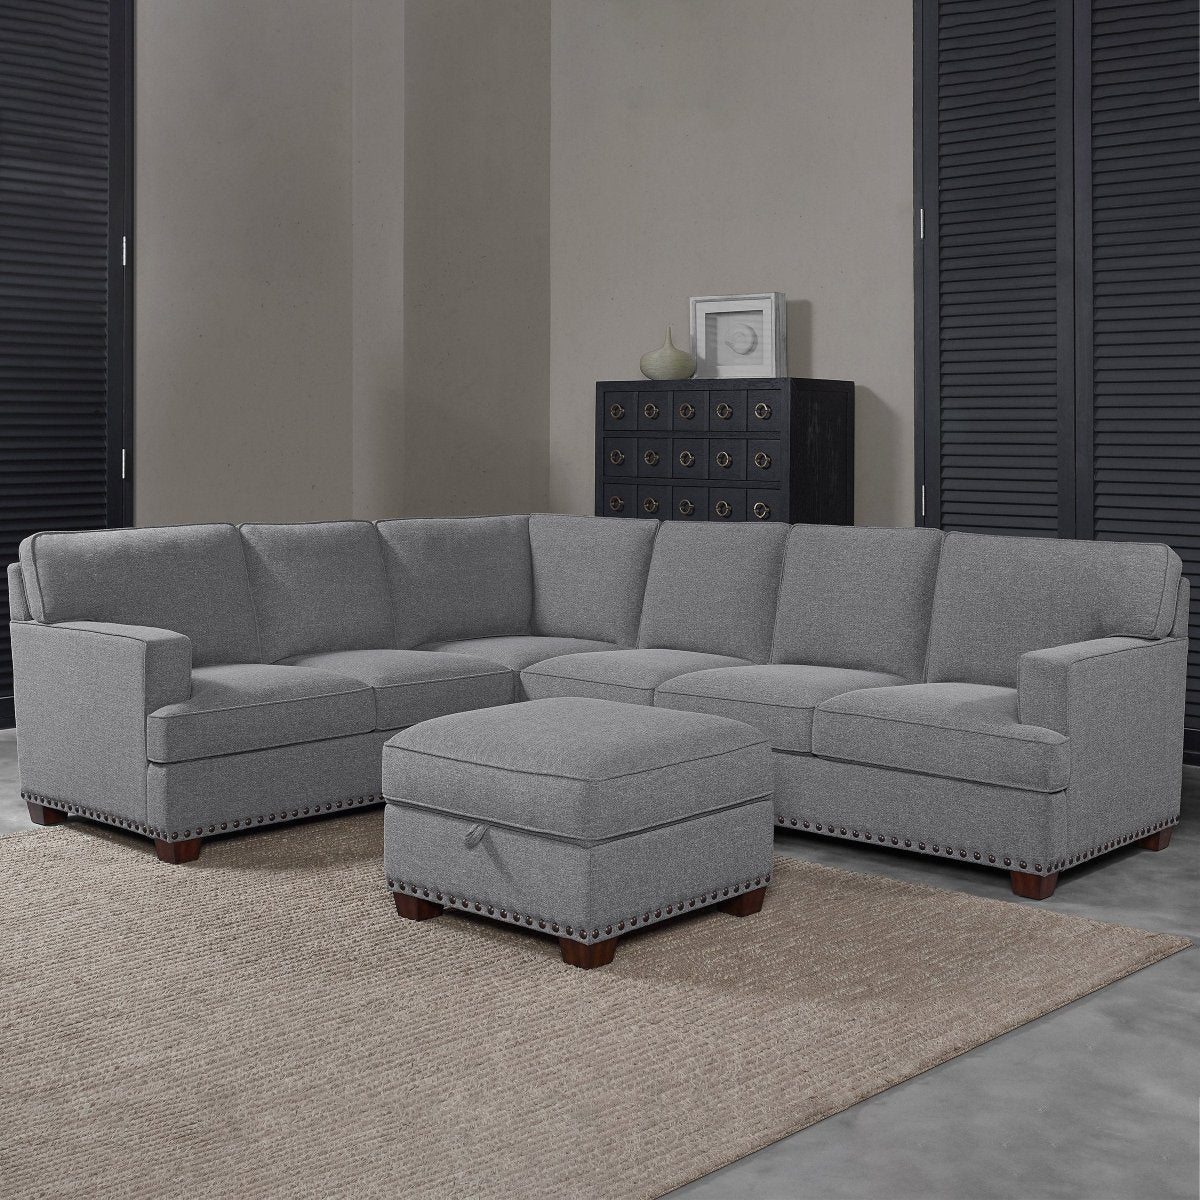 Thomasville Emilee Fabric Sectional with Storage Ottoman - Alpine Outlets